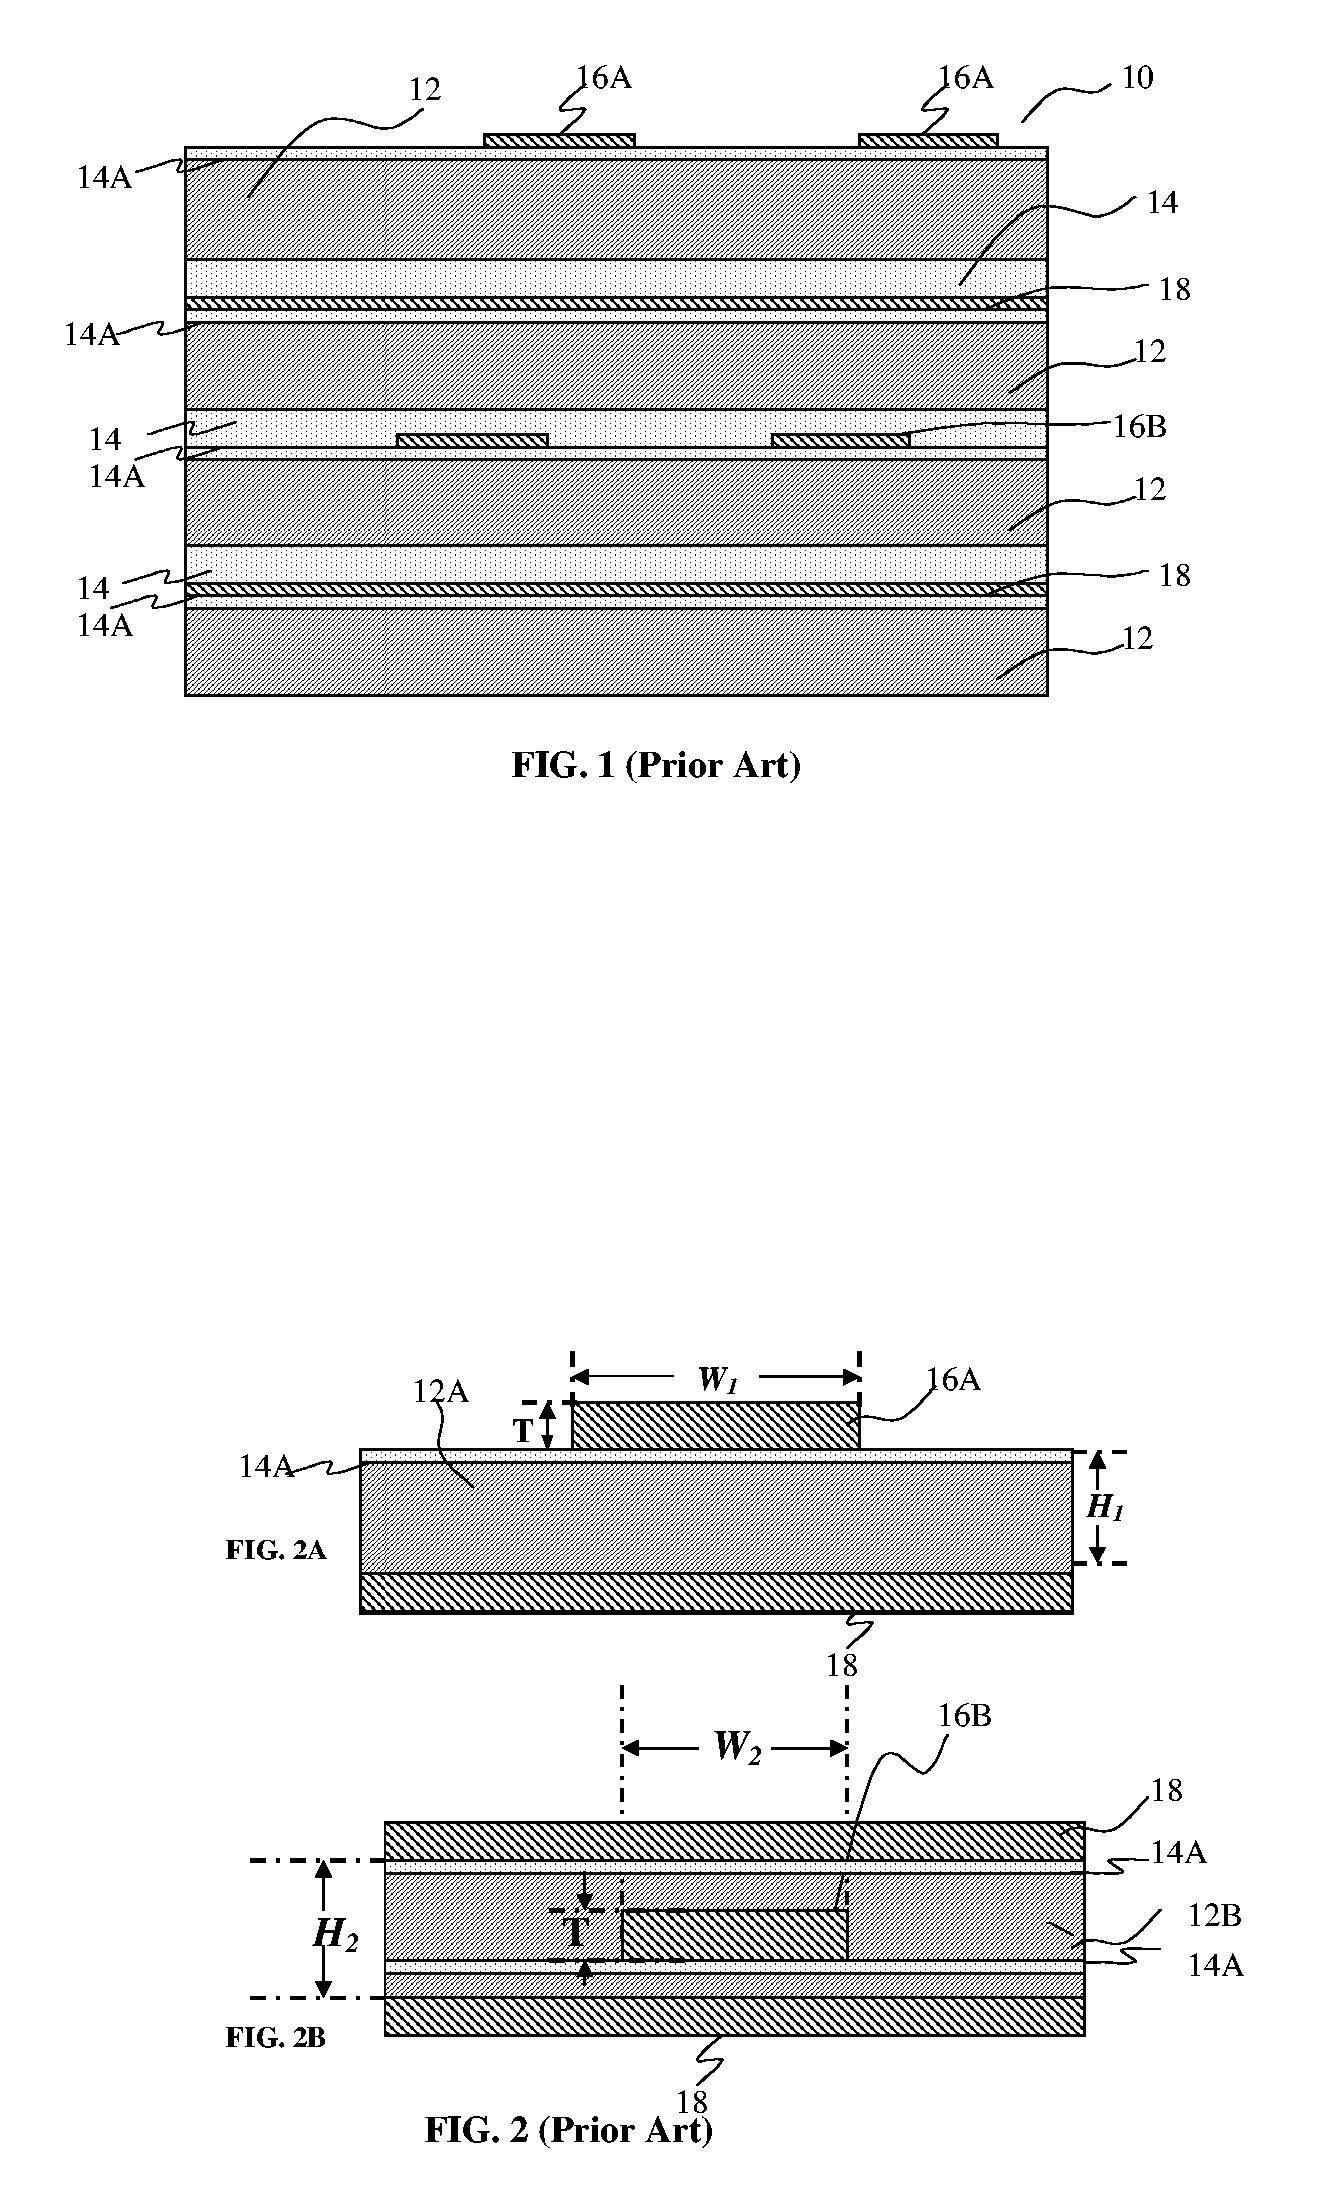 High-speed flex printed circuit and method of manufacturing